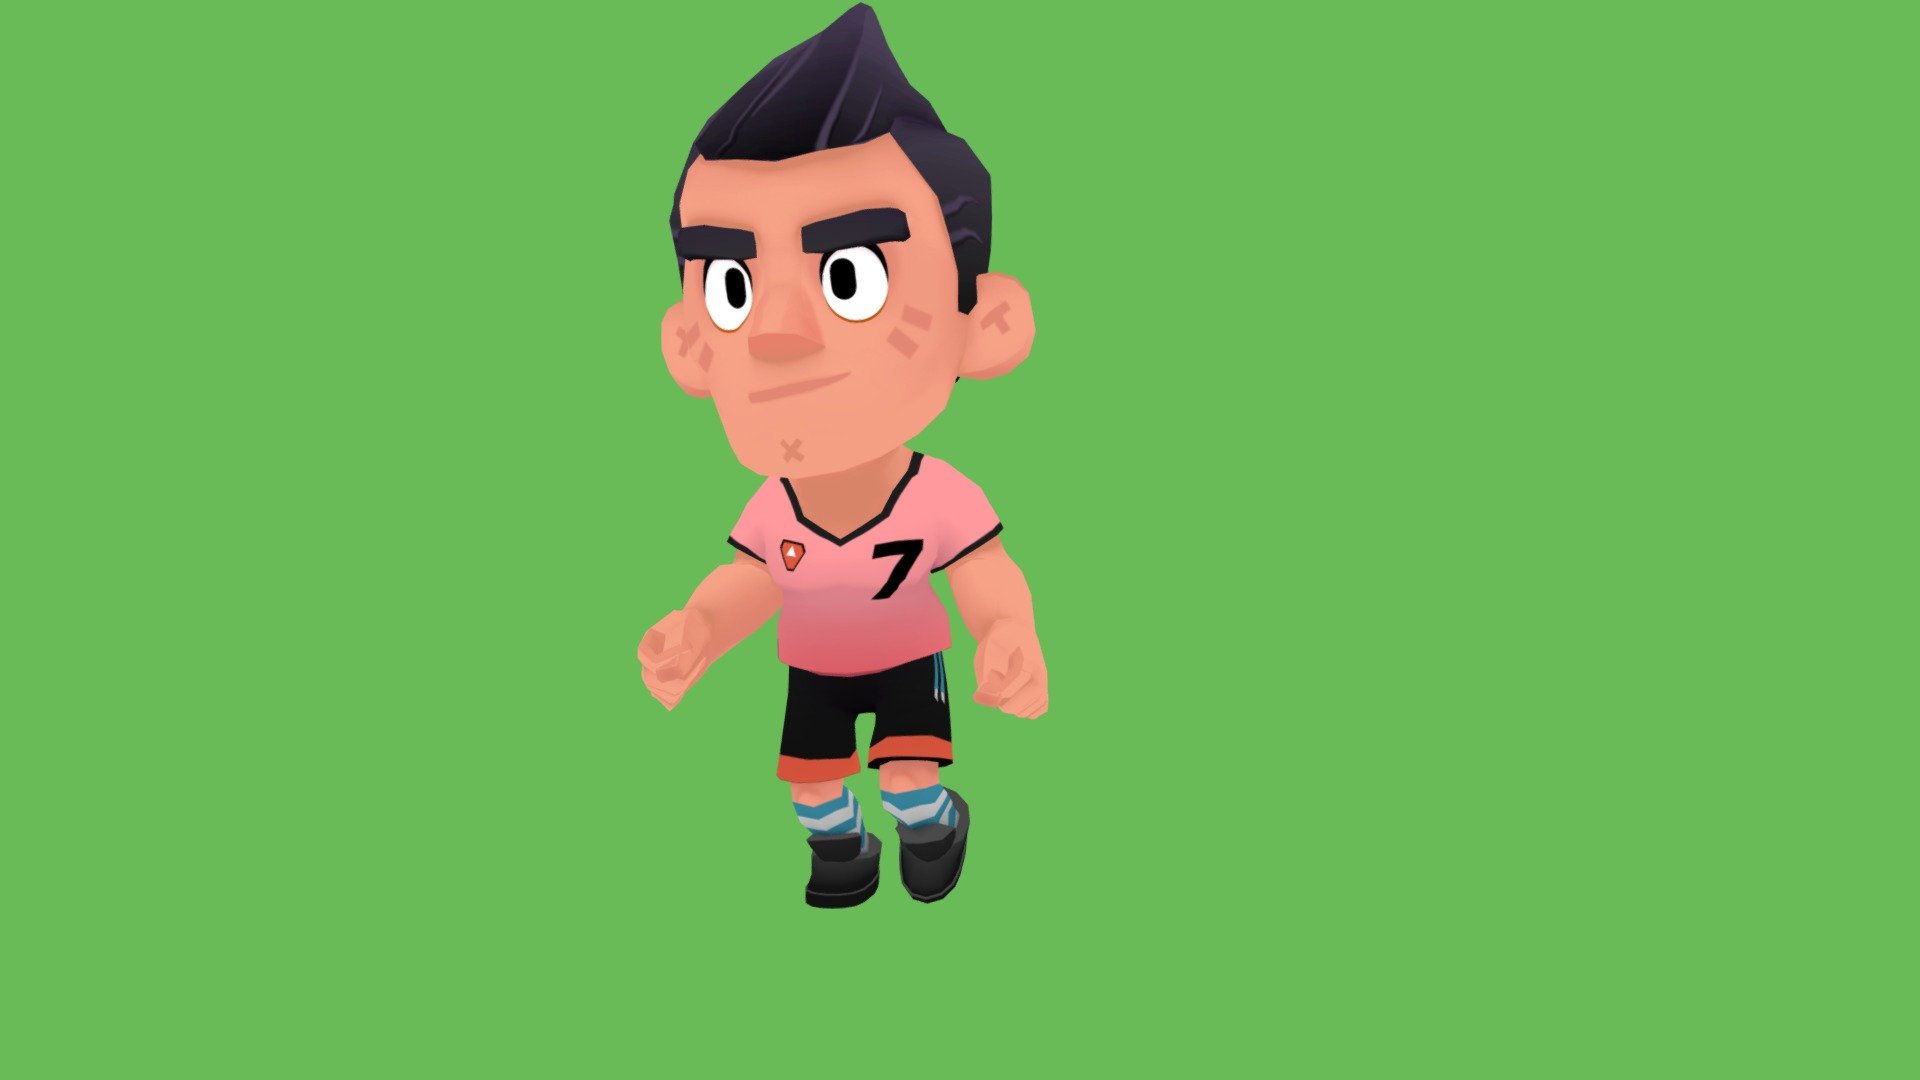 A stylized character for a mobile soccer game - Stylized Soccer Player - Buy Royalty Free 3D model by Sergio Panzarella (@sirjoepanzer) 3d model